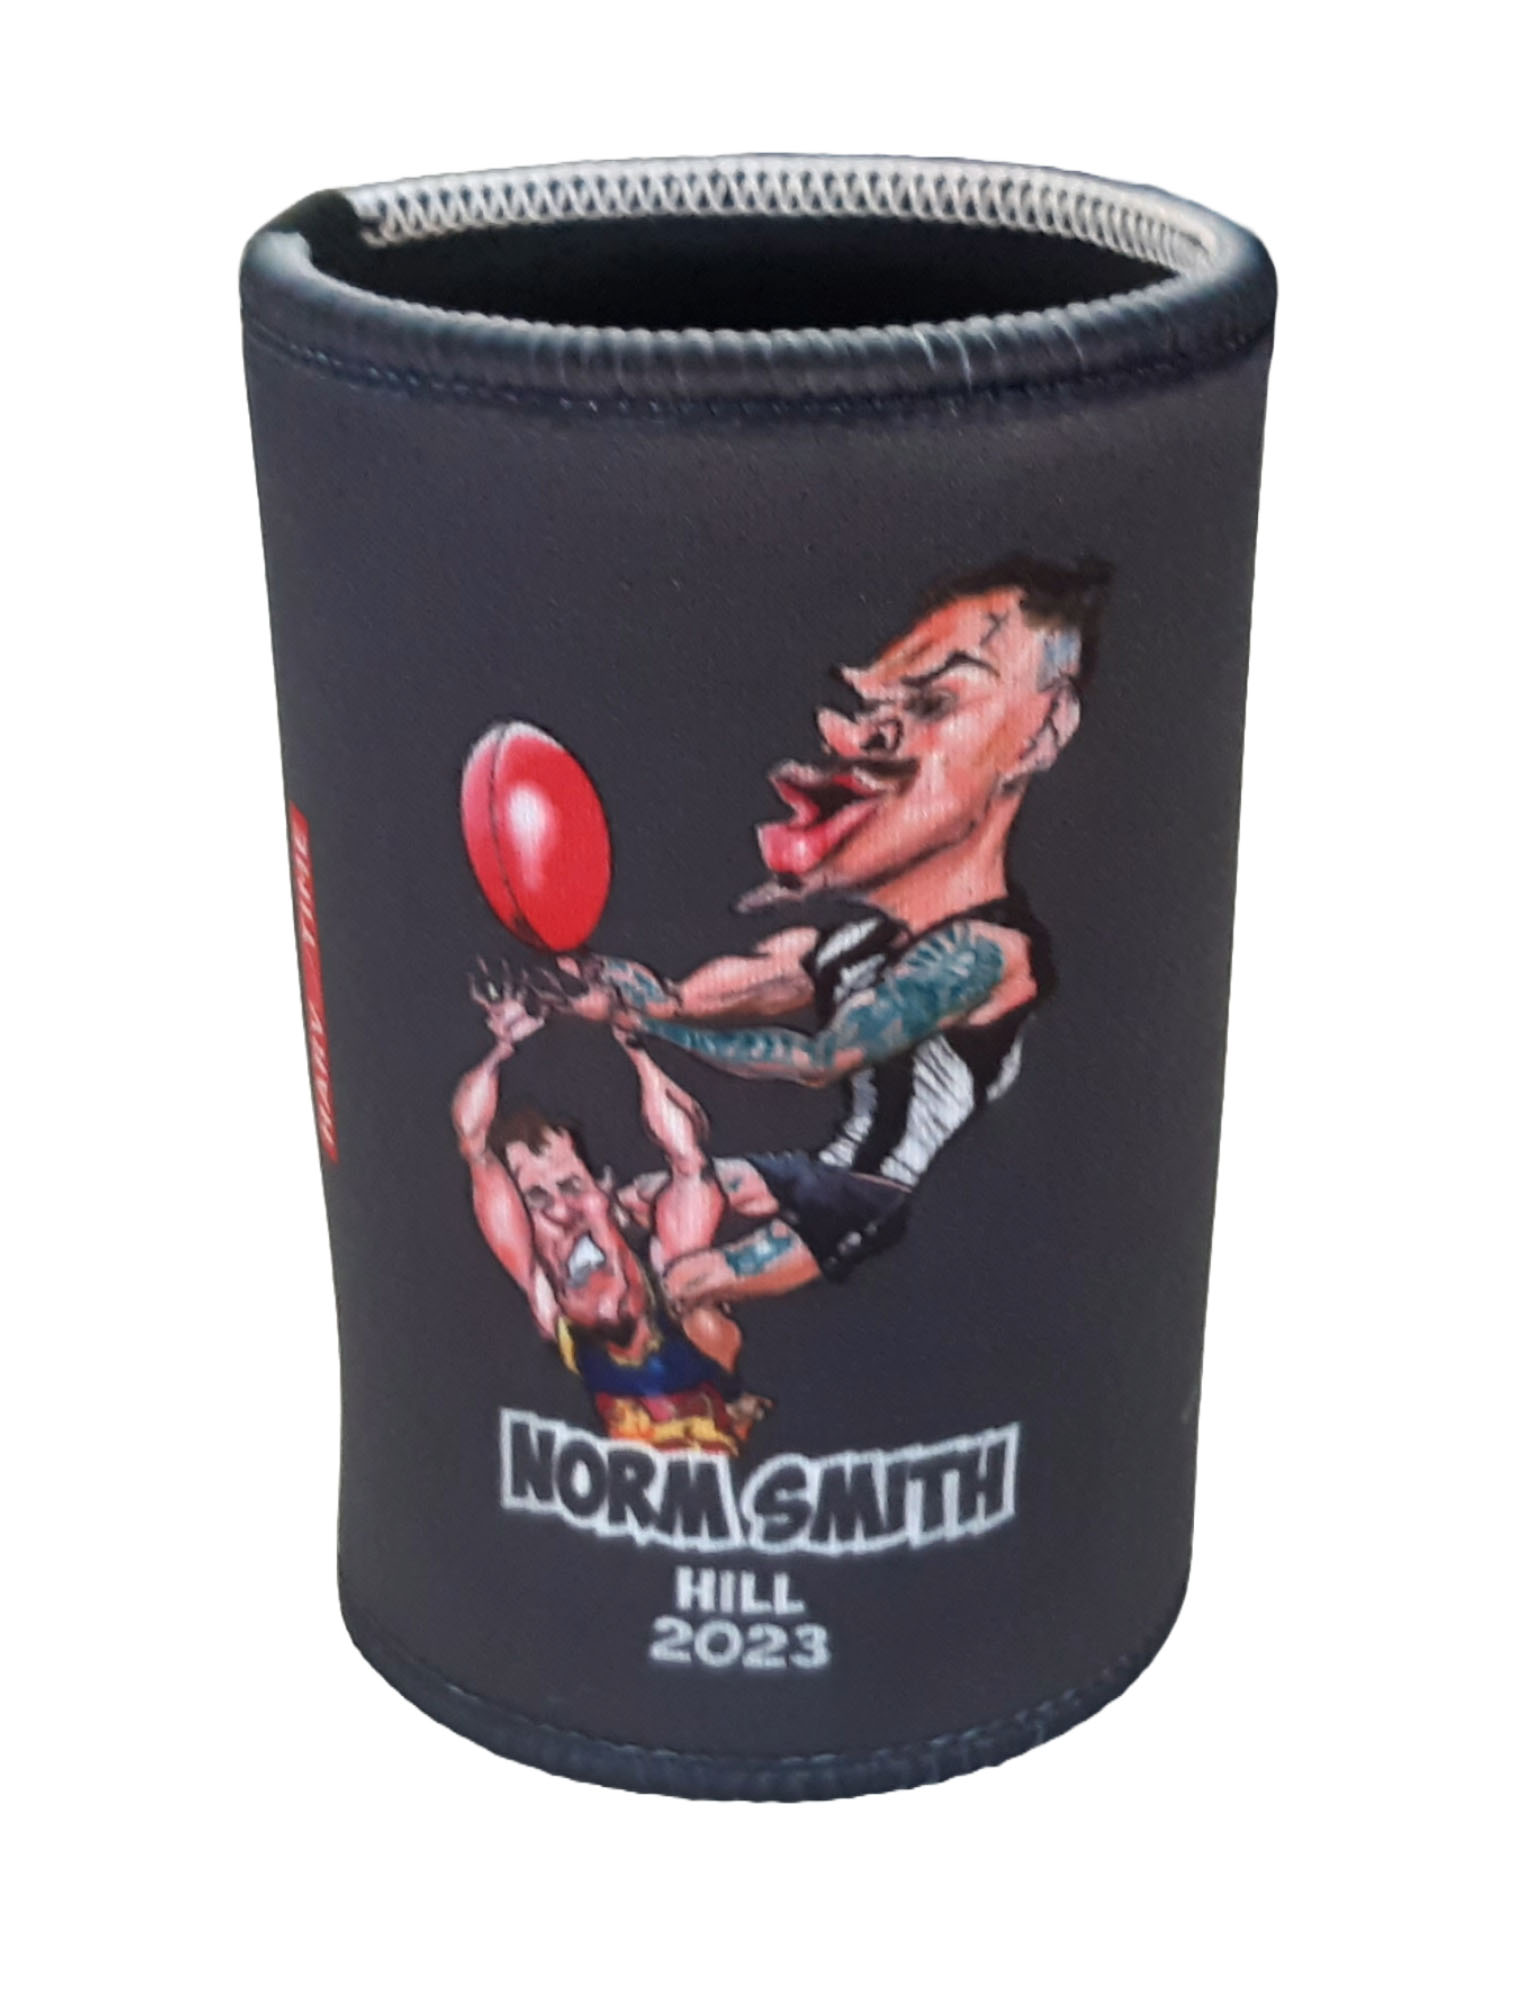 Magpies 2023 Norm Smith Stubby Holder